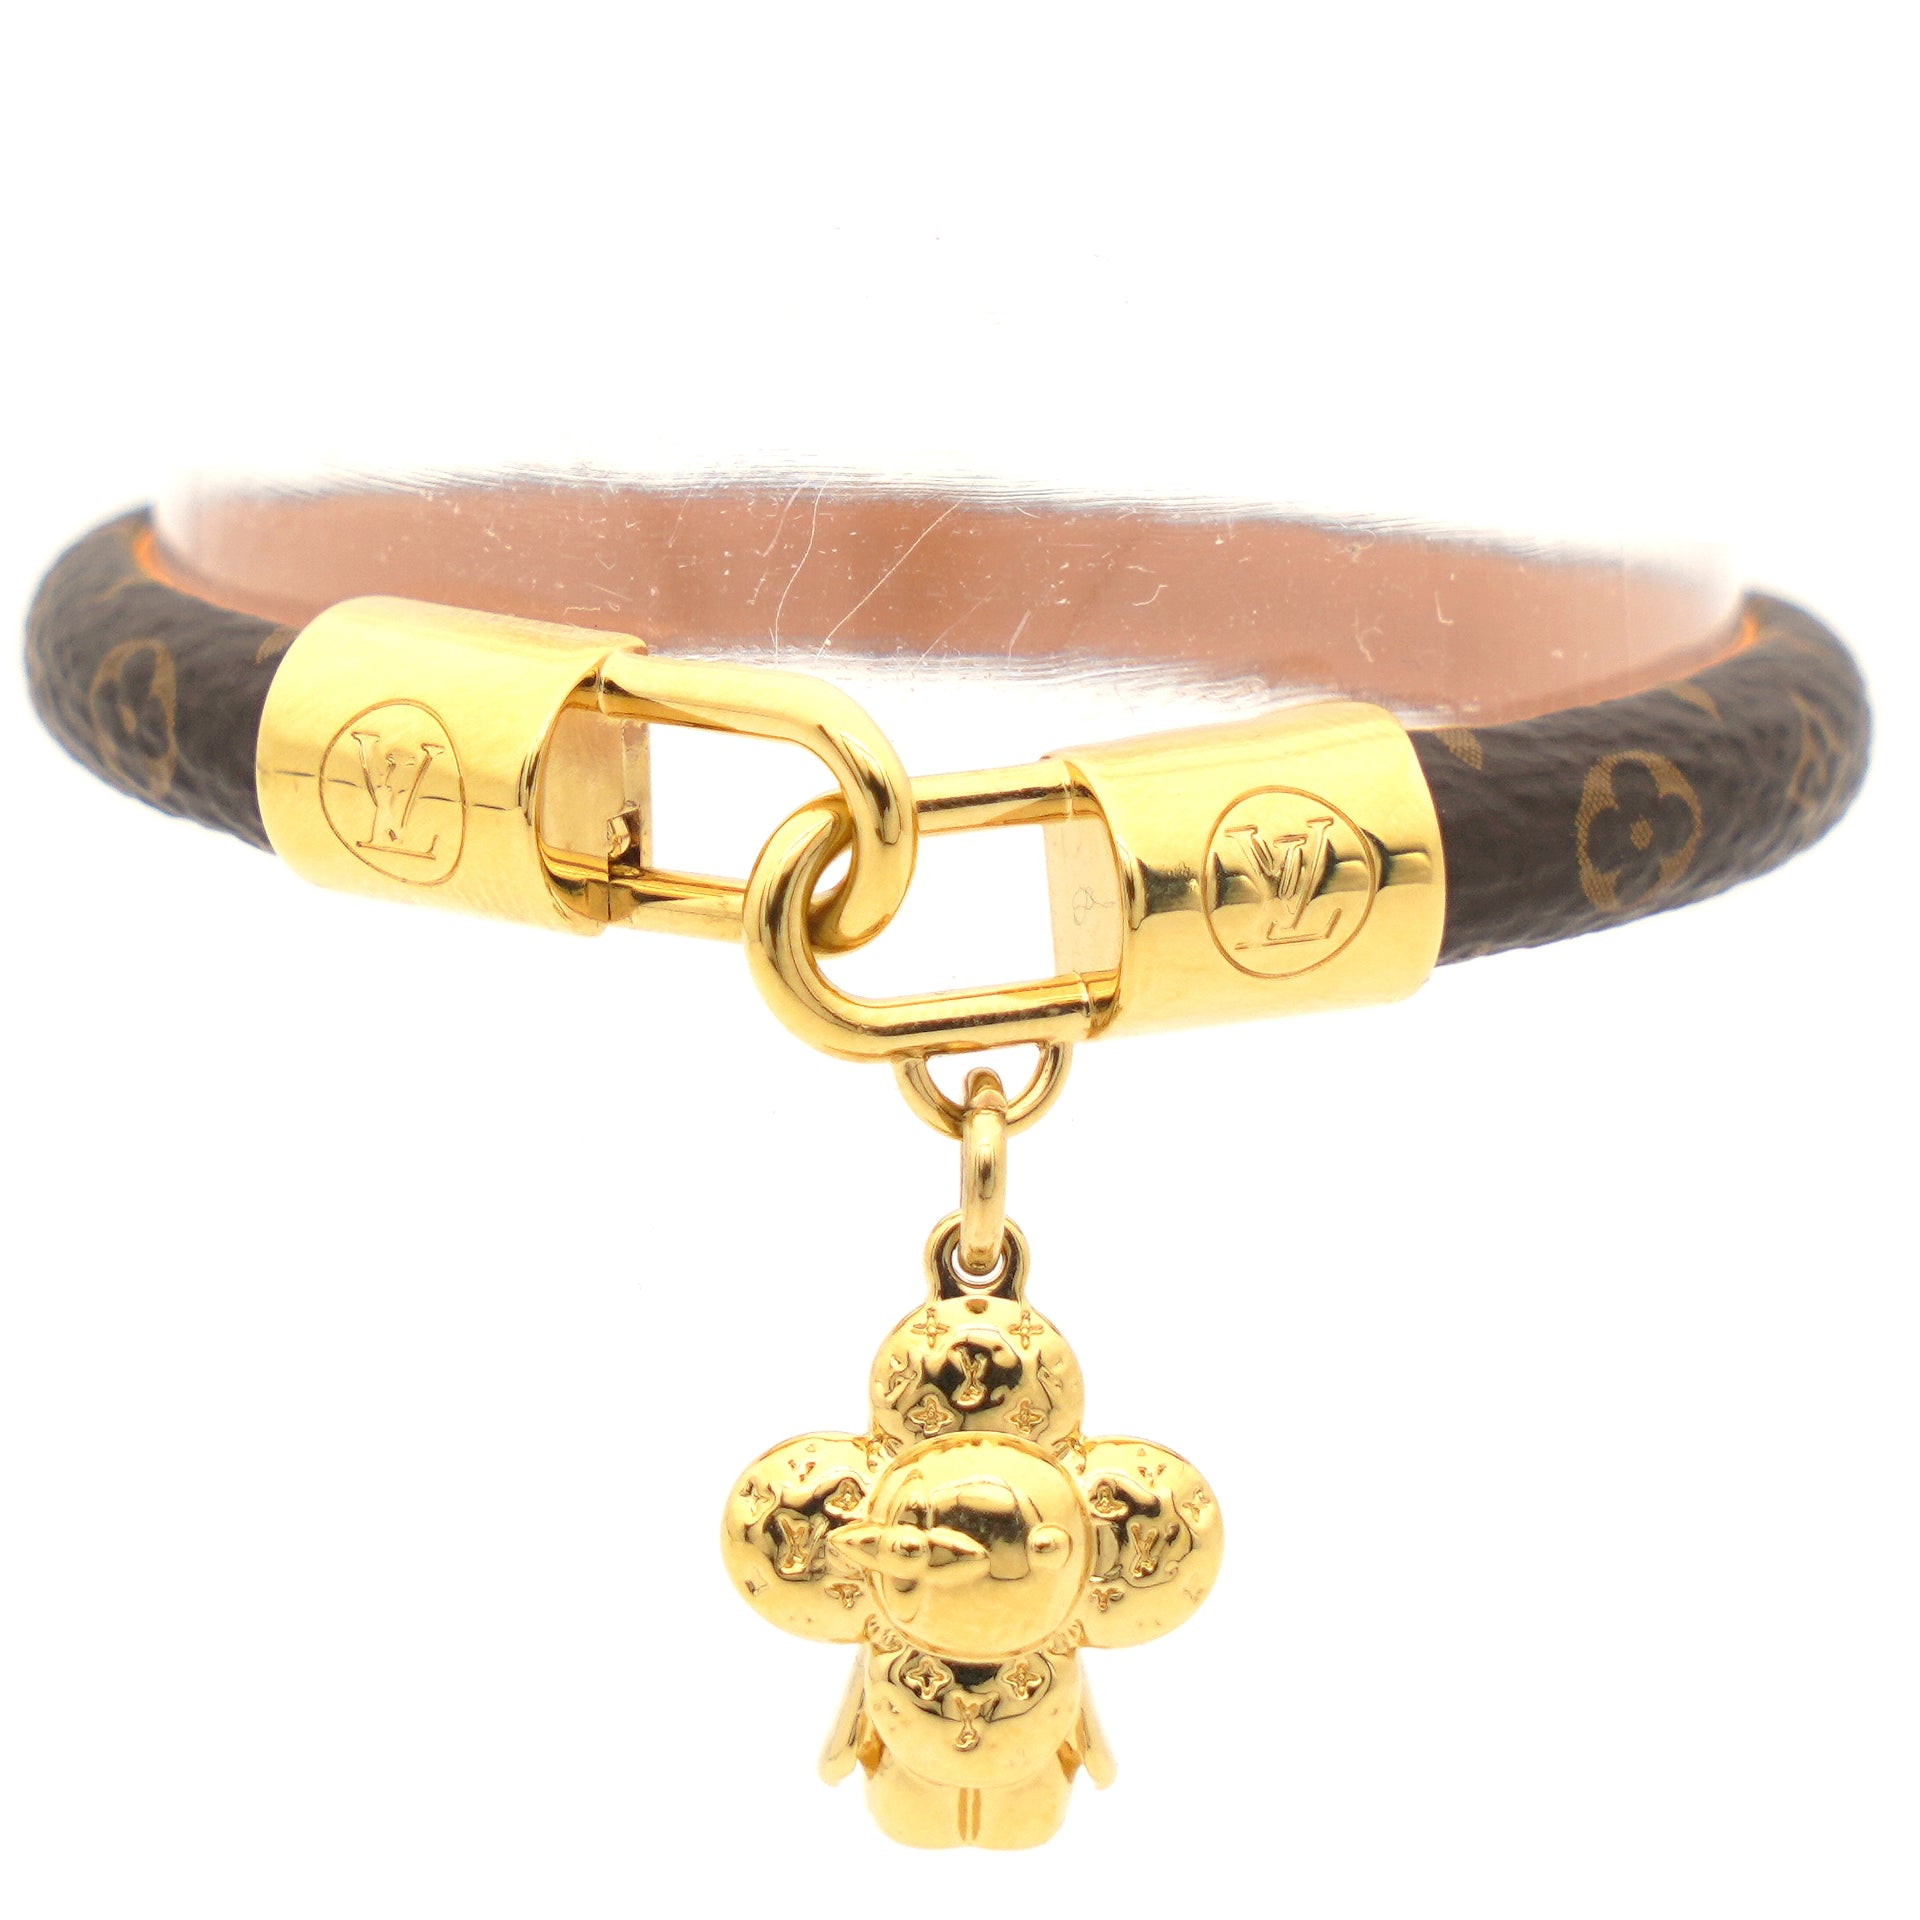 Louis Vuitton - Authenticated Bracelet - Metal Gold for Women, Very Good Condition